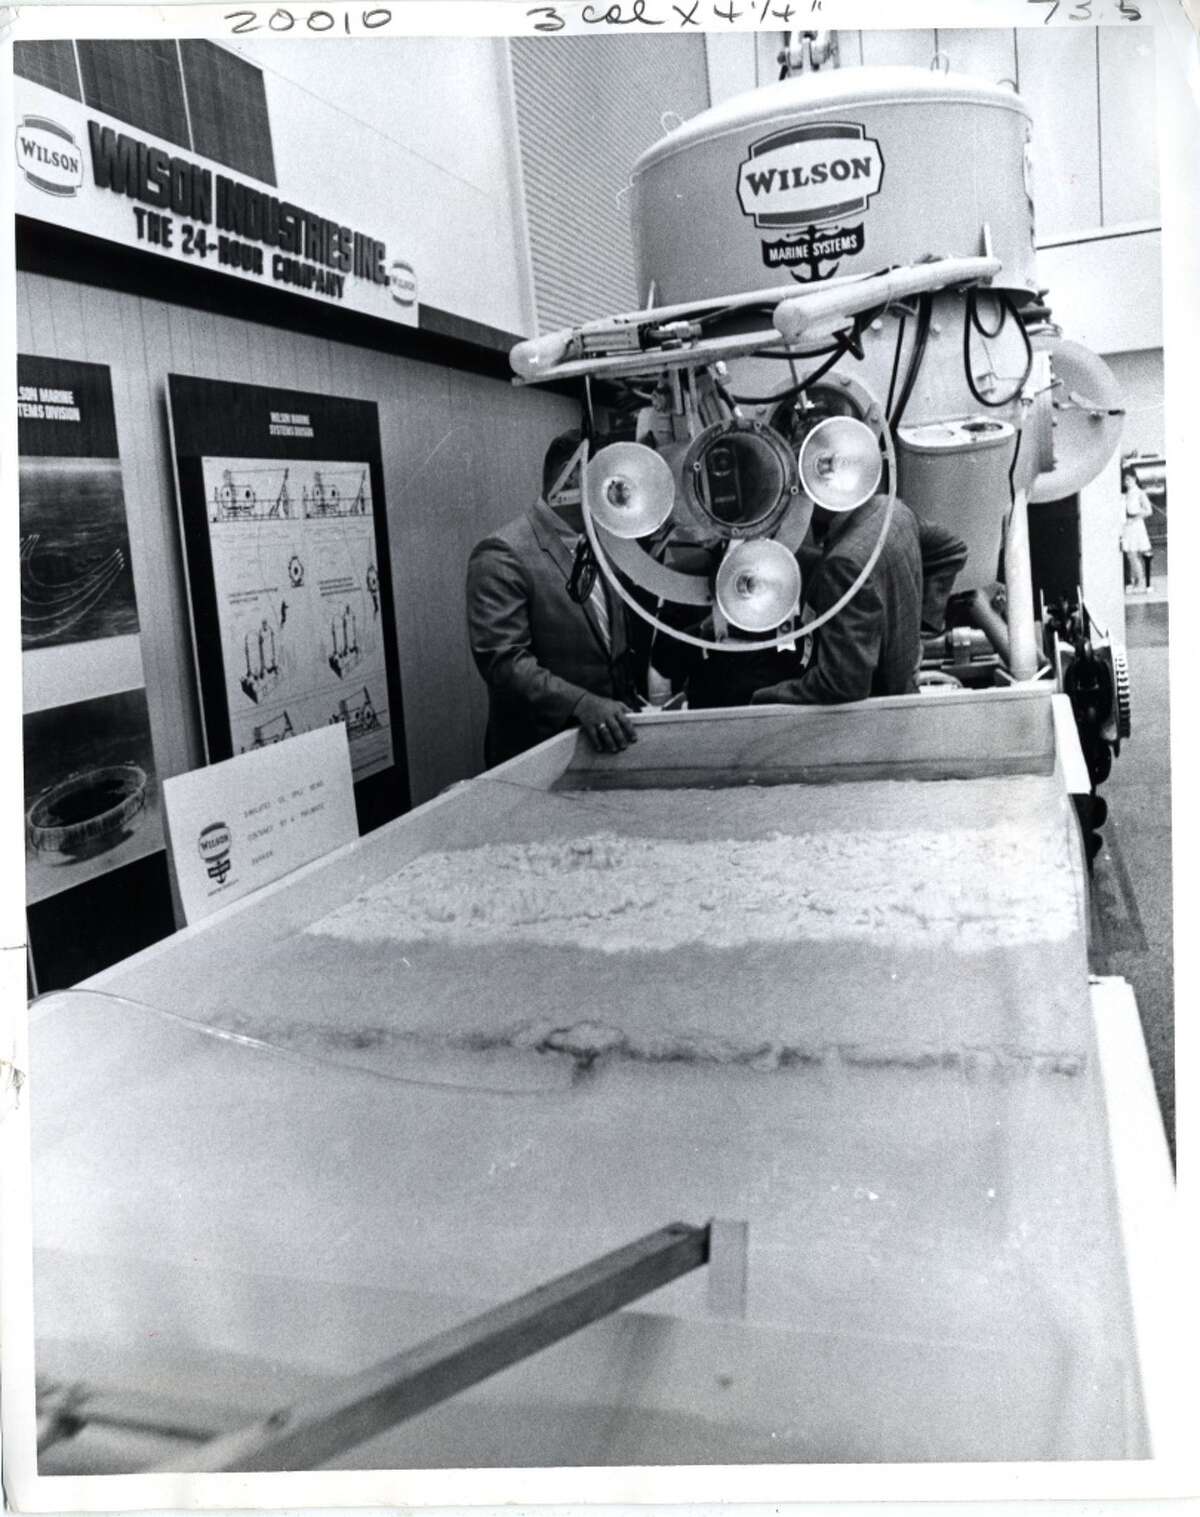 1970 - Wilson Marine Systems' Naucrates was on display at Offshore Technology Conference.